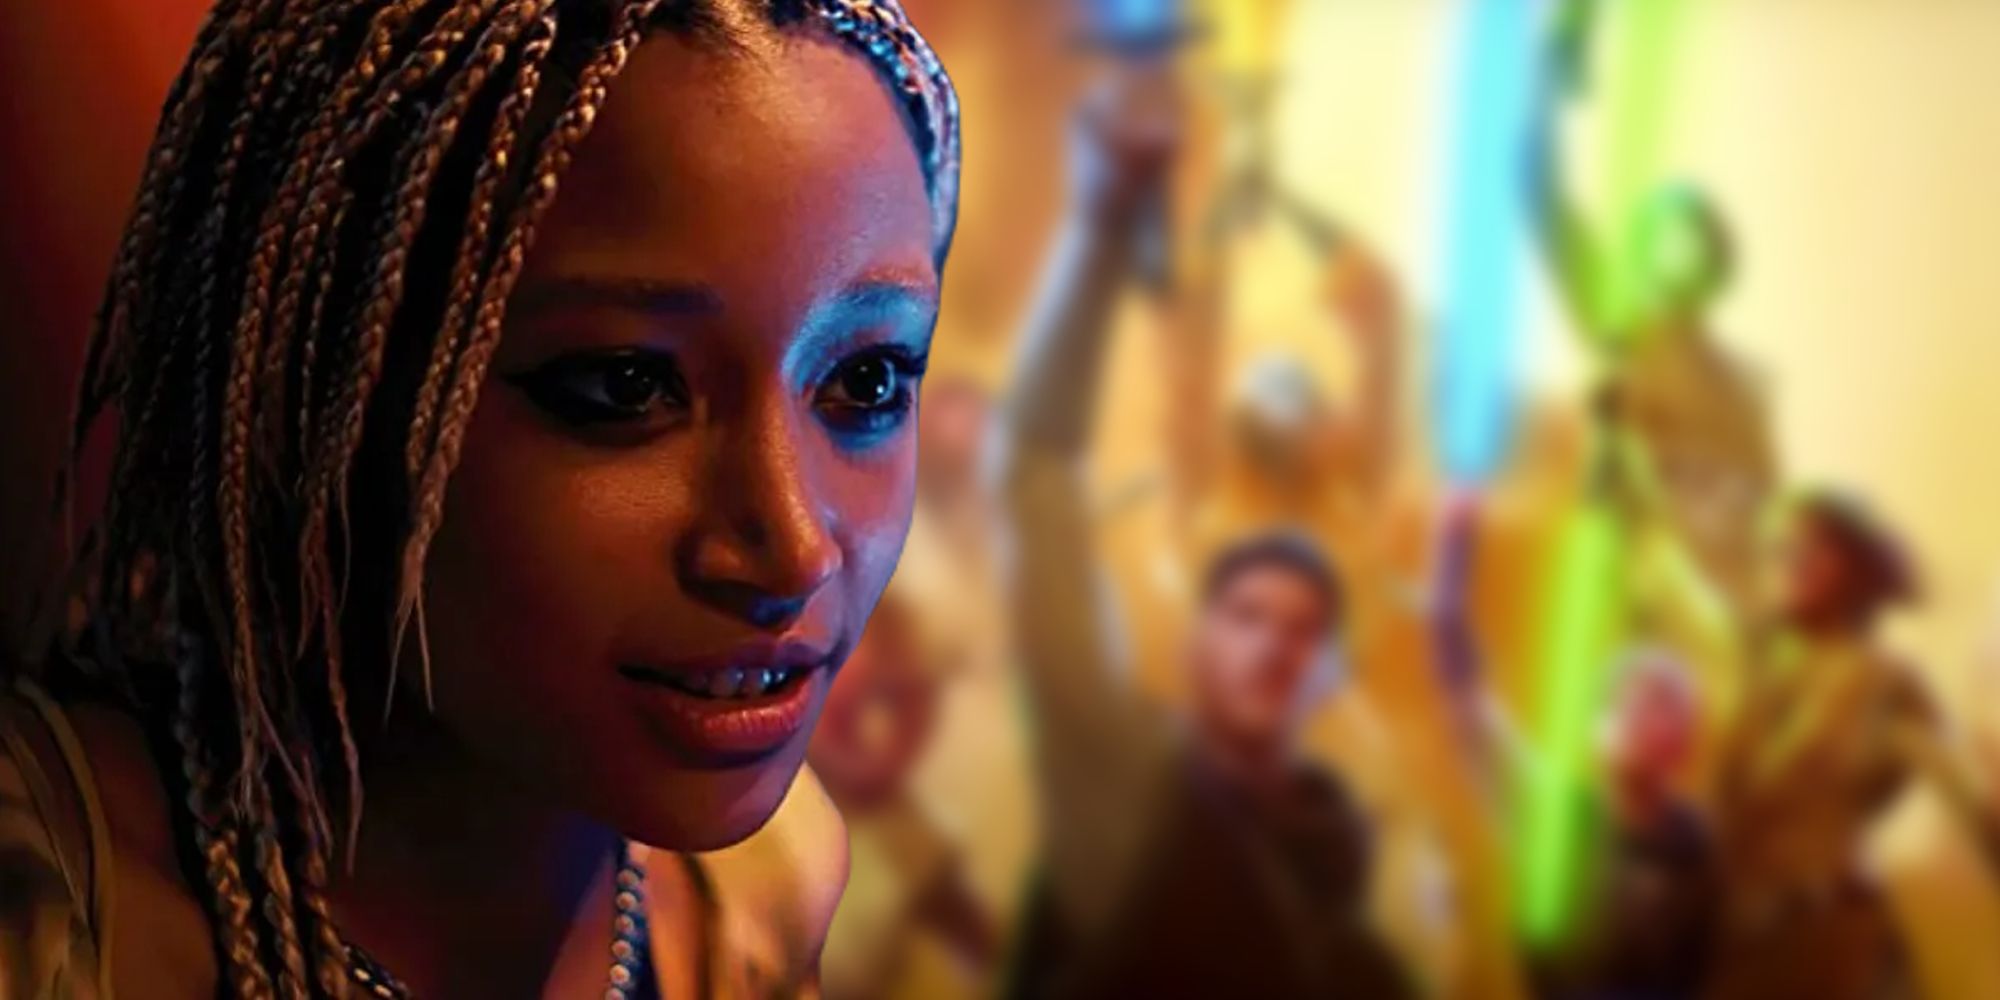 Amandla Stenberg next to a blurred image of the Jedi Order from the High Republic